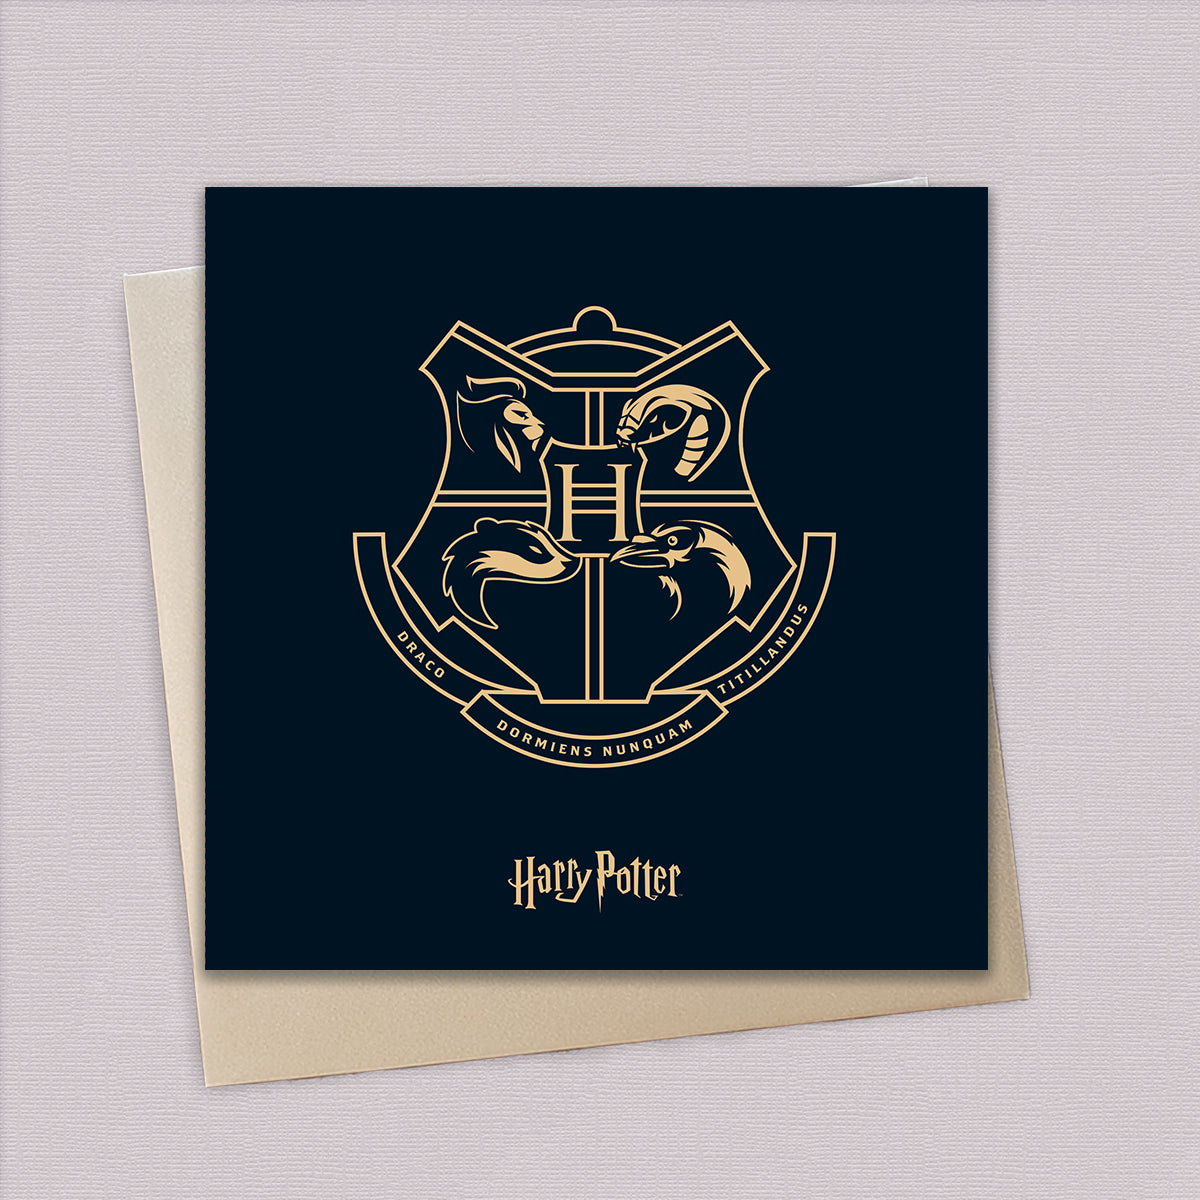 Harry Potter Hogwarts Birthday Greeting Card For Adults - Black and Gold